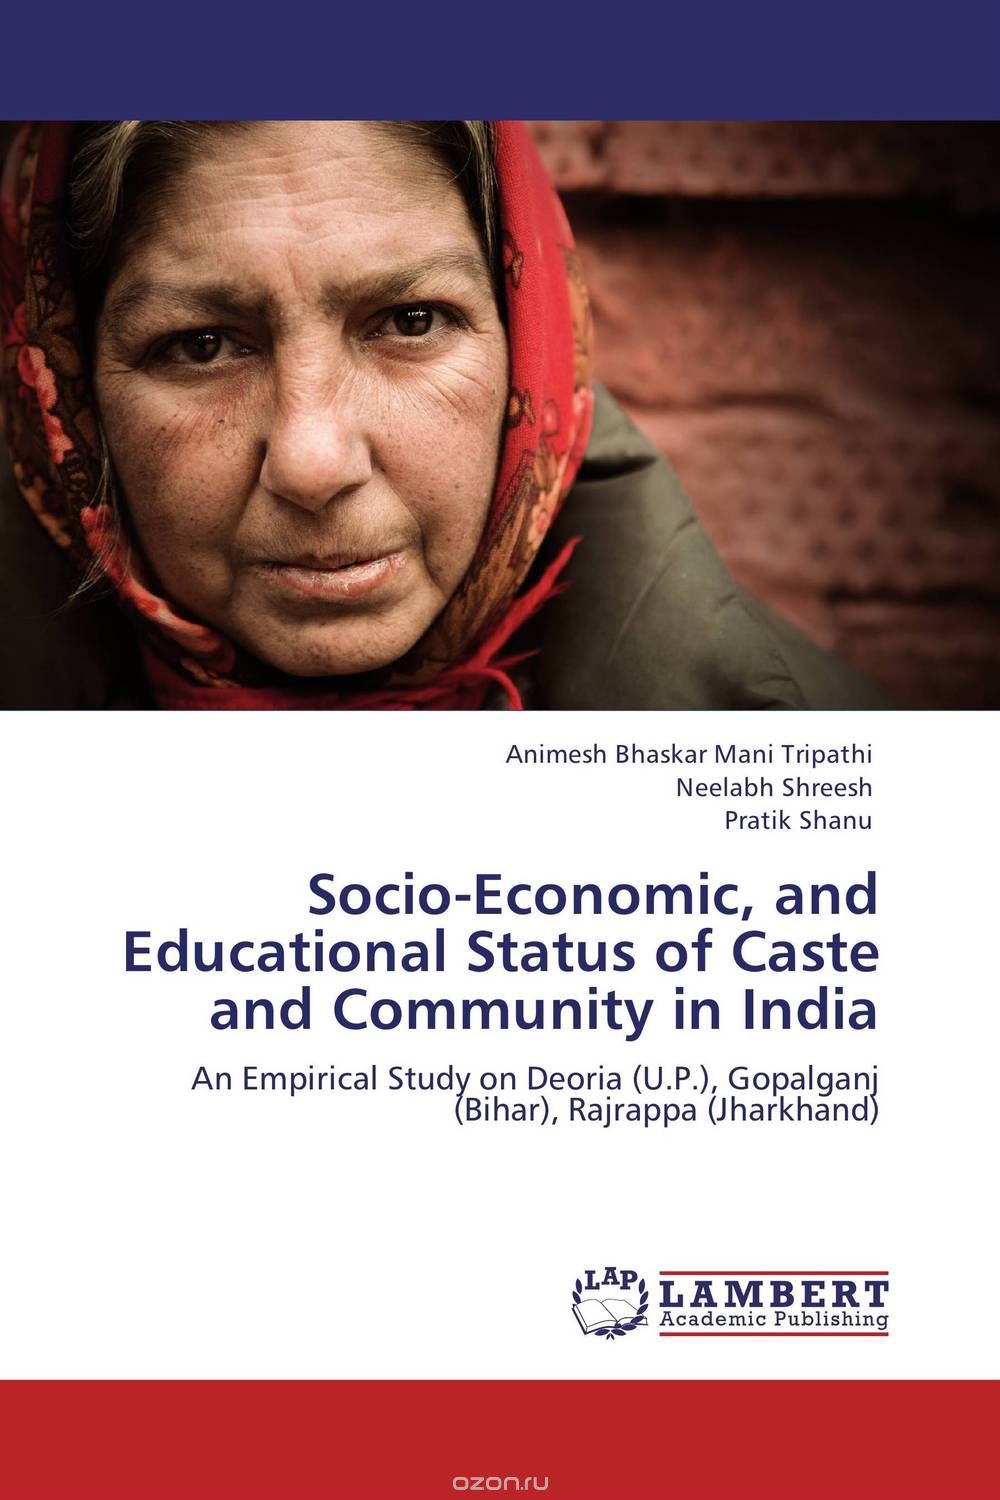 Socio-Economic, and Educational Status of Caste and Community in India